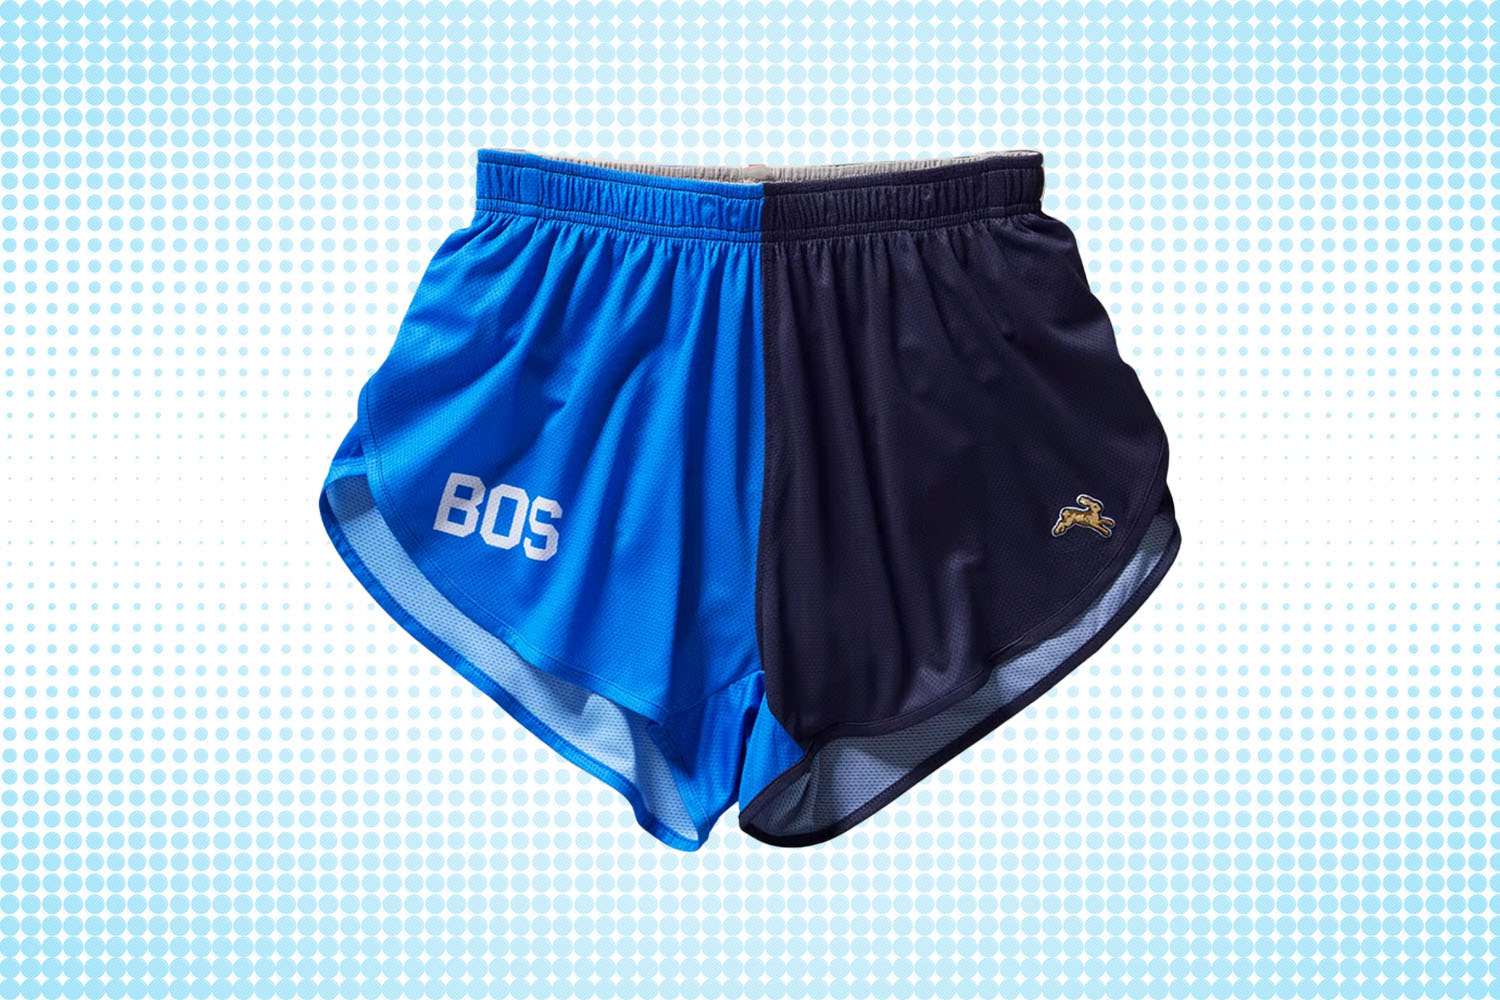 a pair of two-toned black-and-blue split shorts  from Tracksmith on a white and blue dotted background 